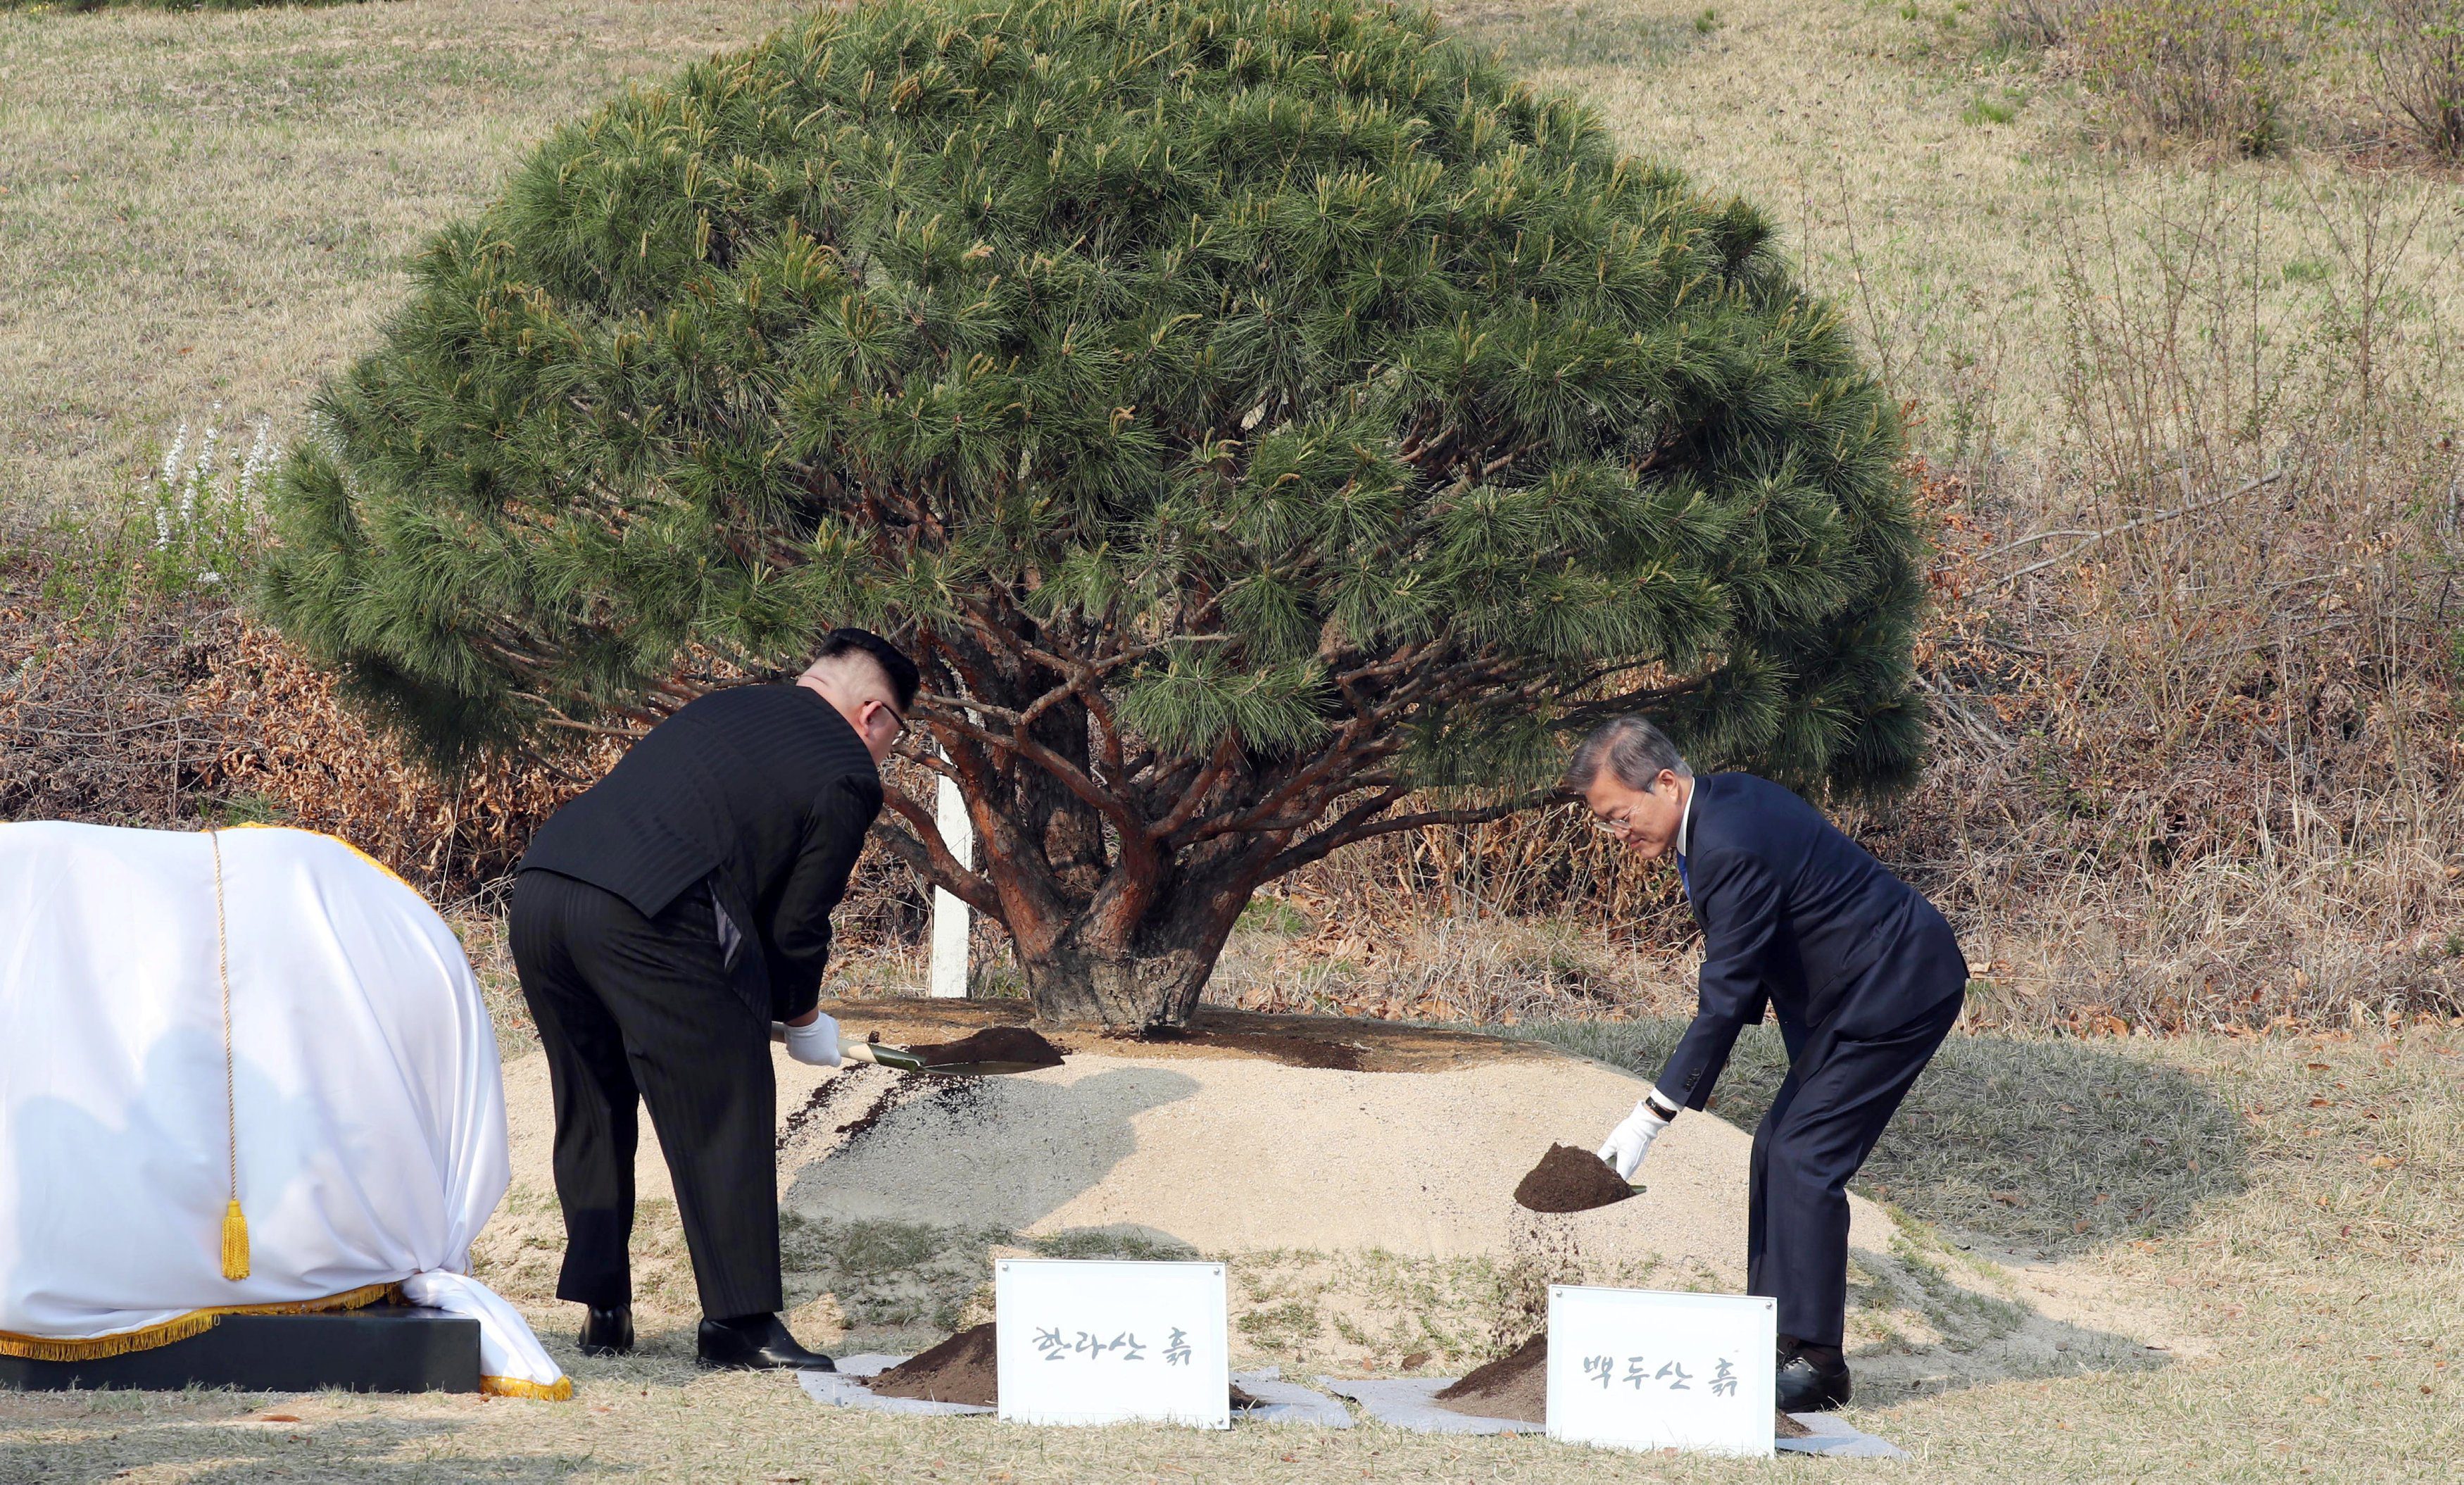 South Korean President Moon Jae-in and North Korean leader Kim Jong Un plant a commemorative tree at the truce village of Panmunjom